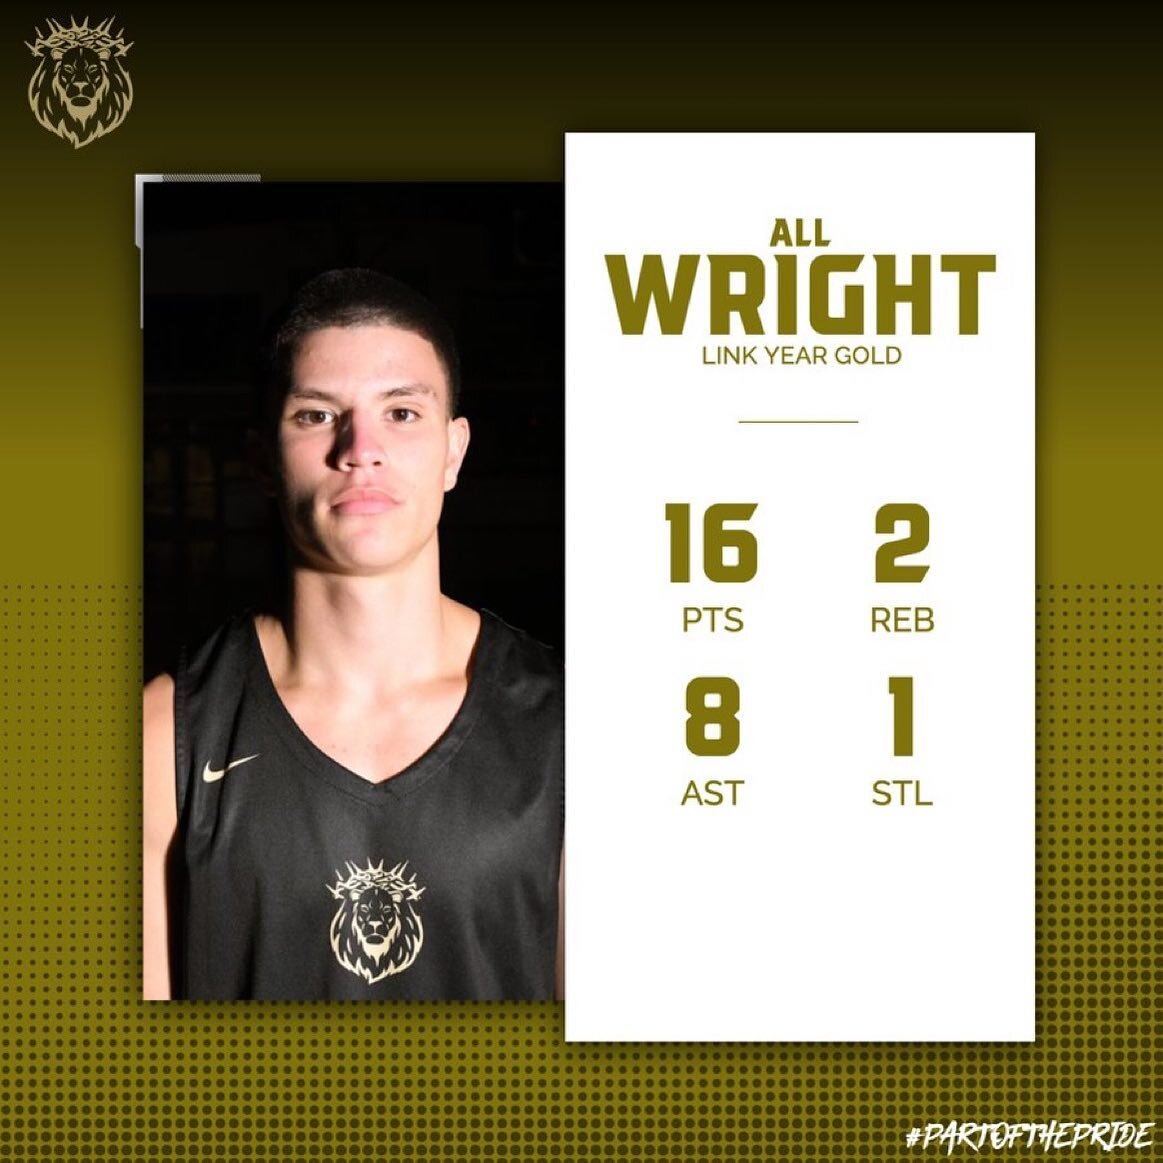 All Wright finished with 16 points, 8 assists, 2 rebounds, and 1 steal ✅

#PartOfThePride 🦁